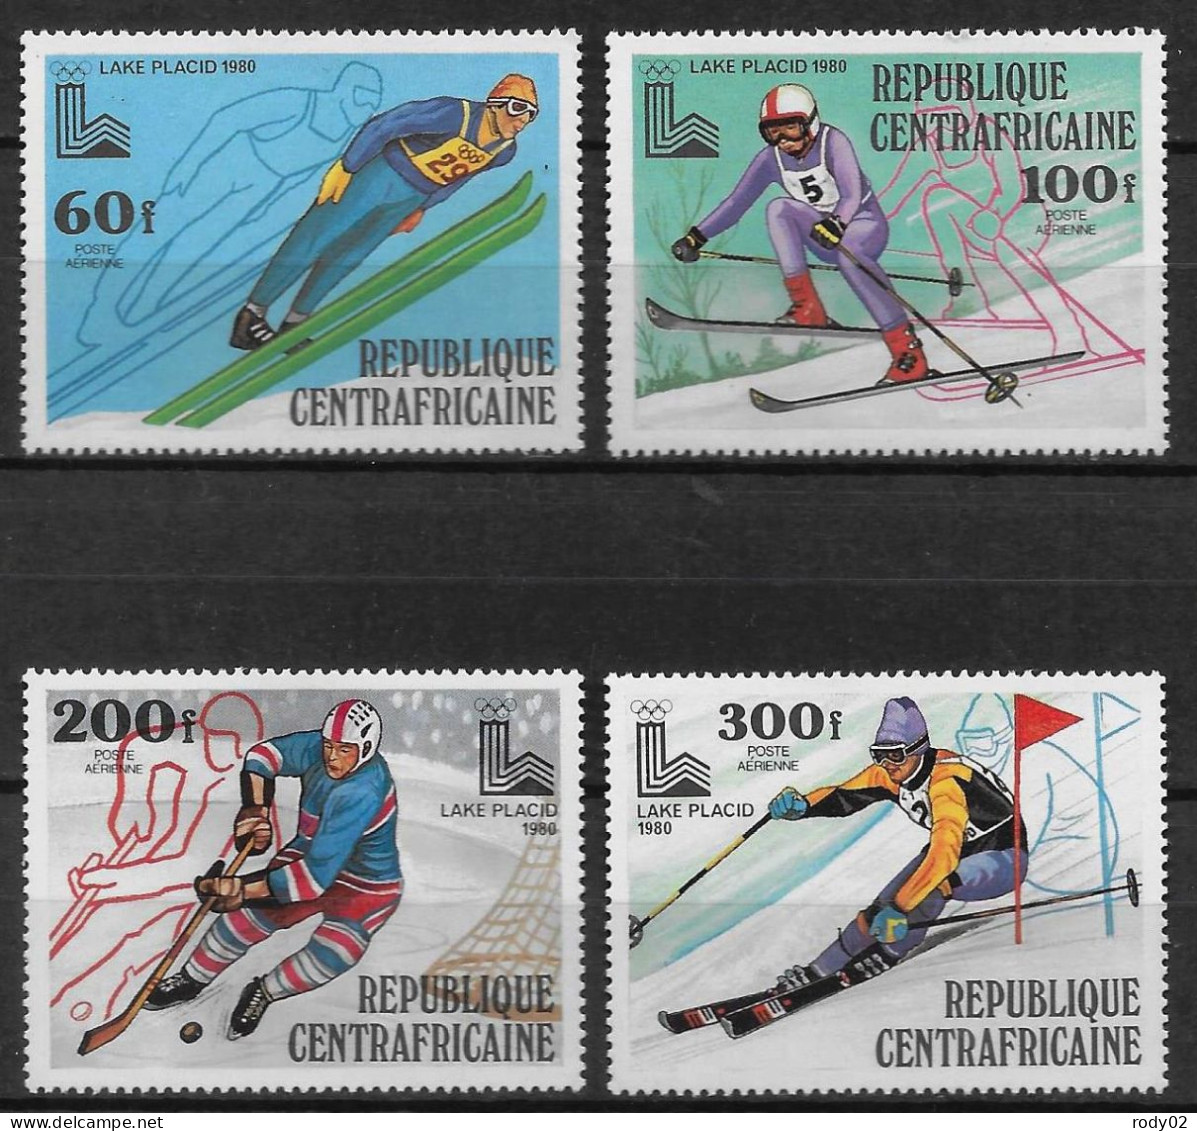 CENTRAFRIQUE - JEUX OLYMPIQUES D'HIVER A LAKE PLACID - PA 208 A 211 ET BF 37 - NEUF** MNH - Inverno1980: Lake Placid